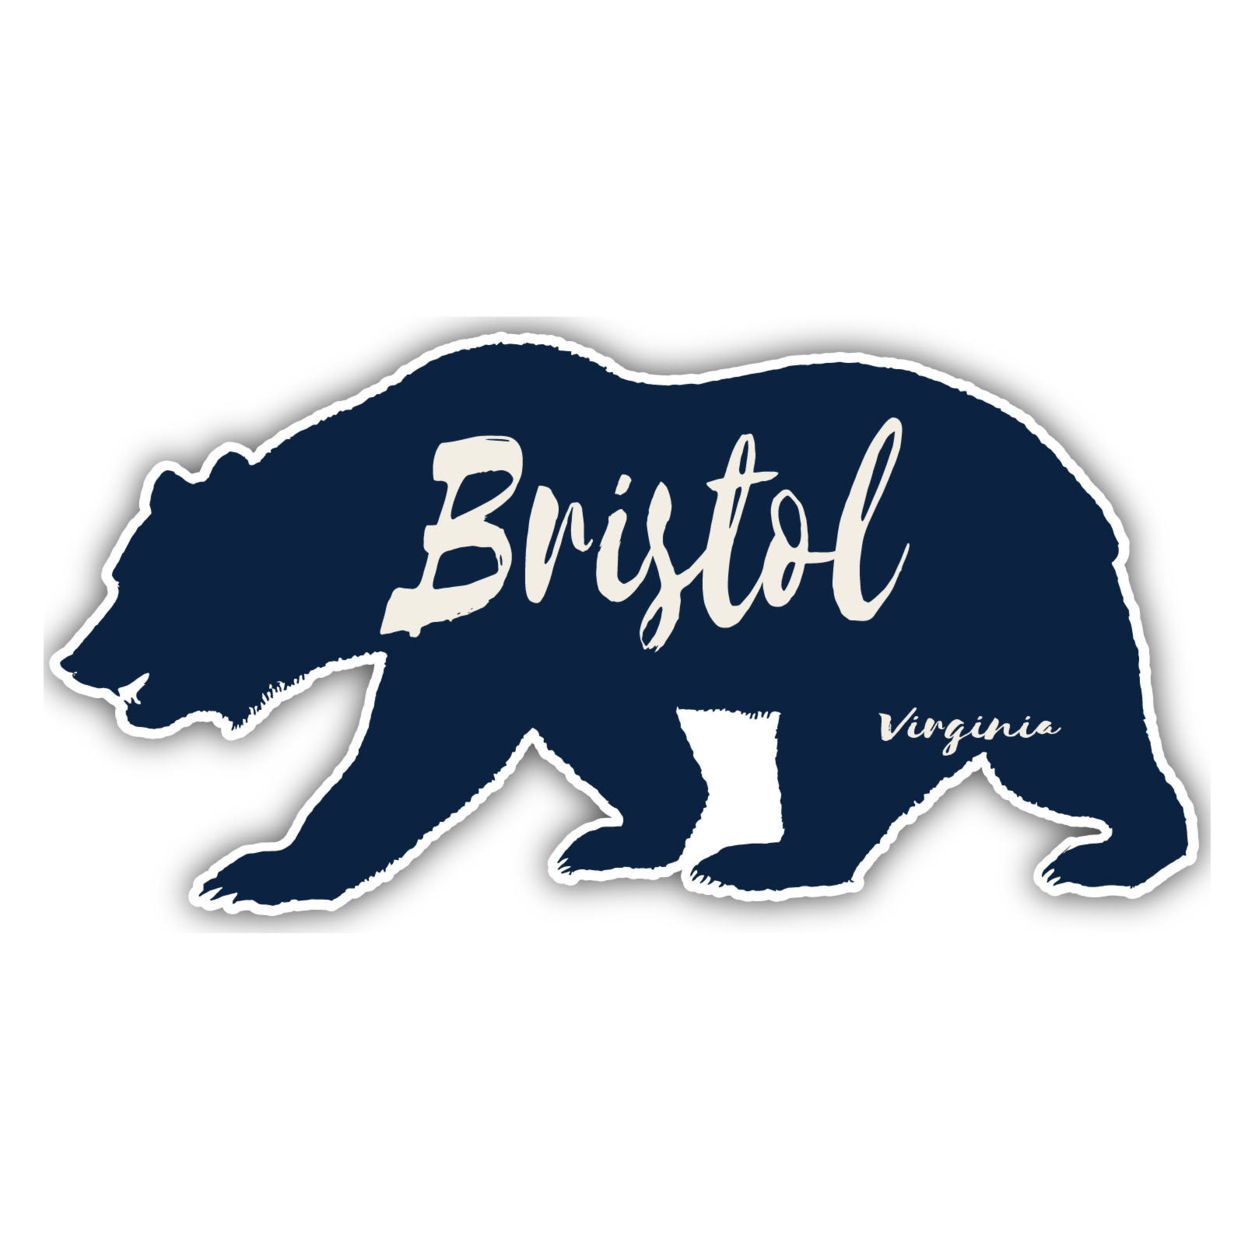 Bristol Virginia Souvenir Decorative Stickers (Choose Theme And Size) - 4-Pack, 8-Inch, Great Outdoors